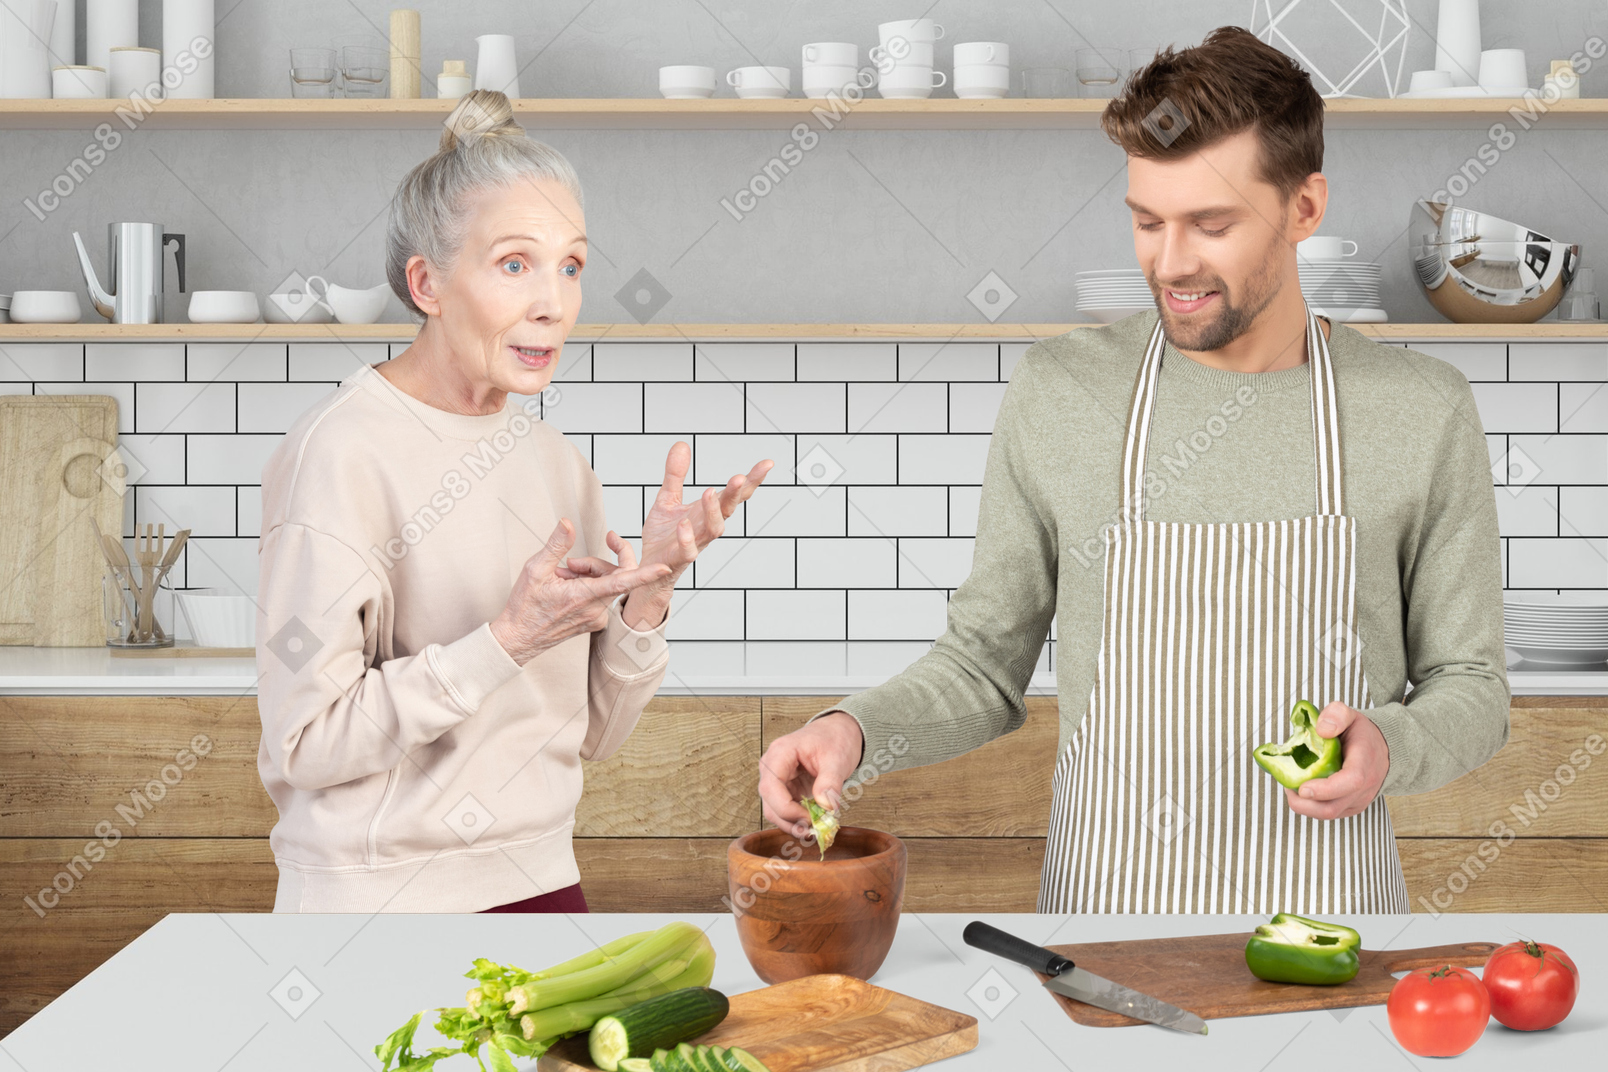 A man and woman in the kitchen preparing food